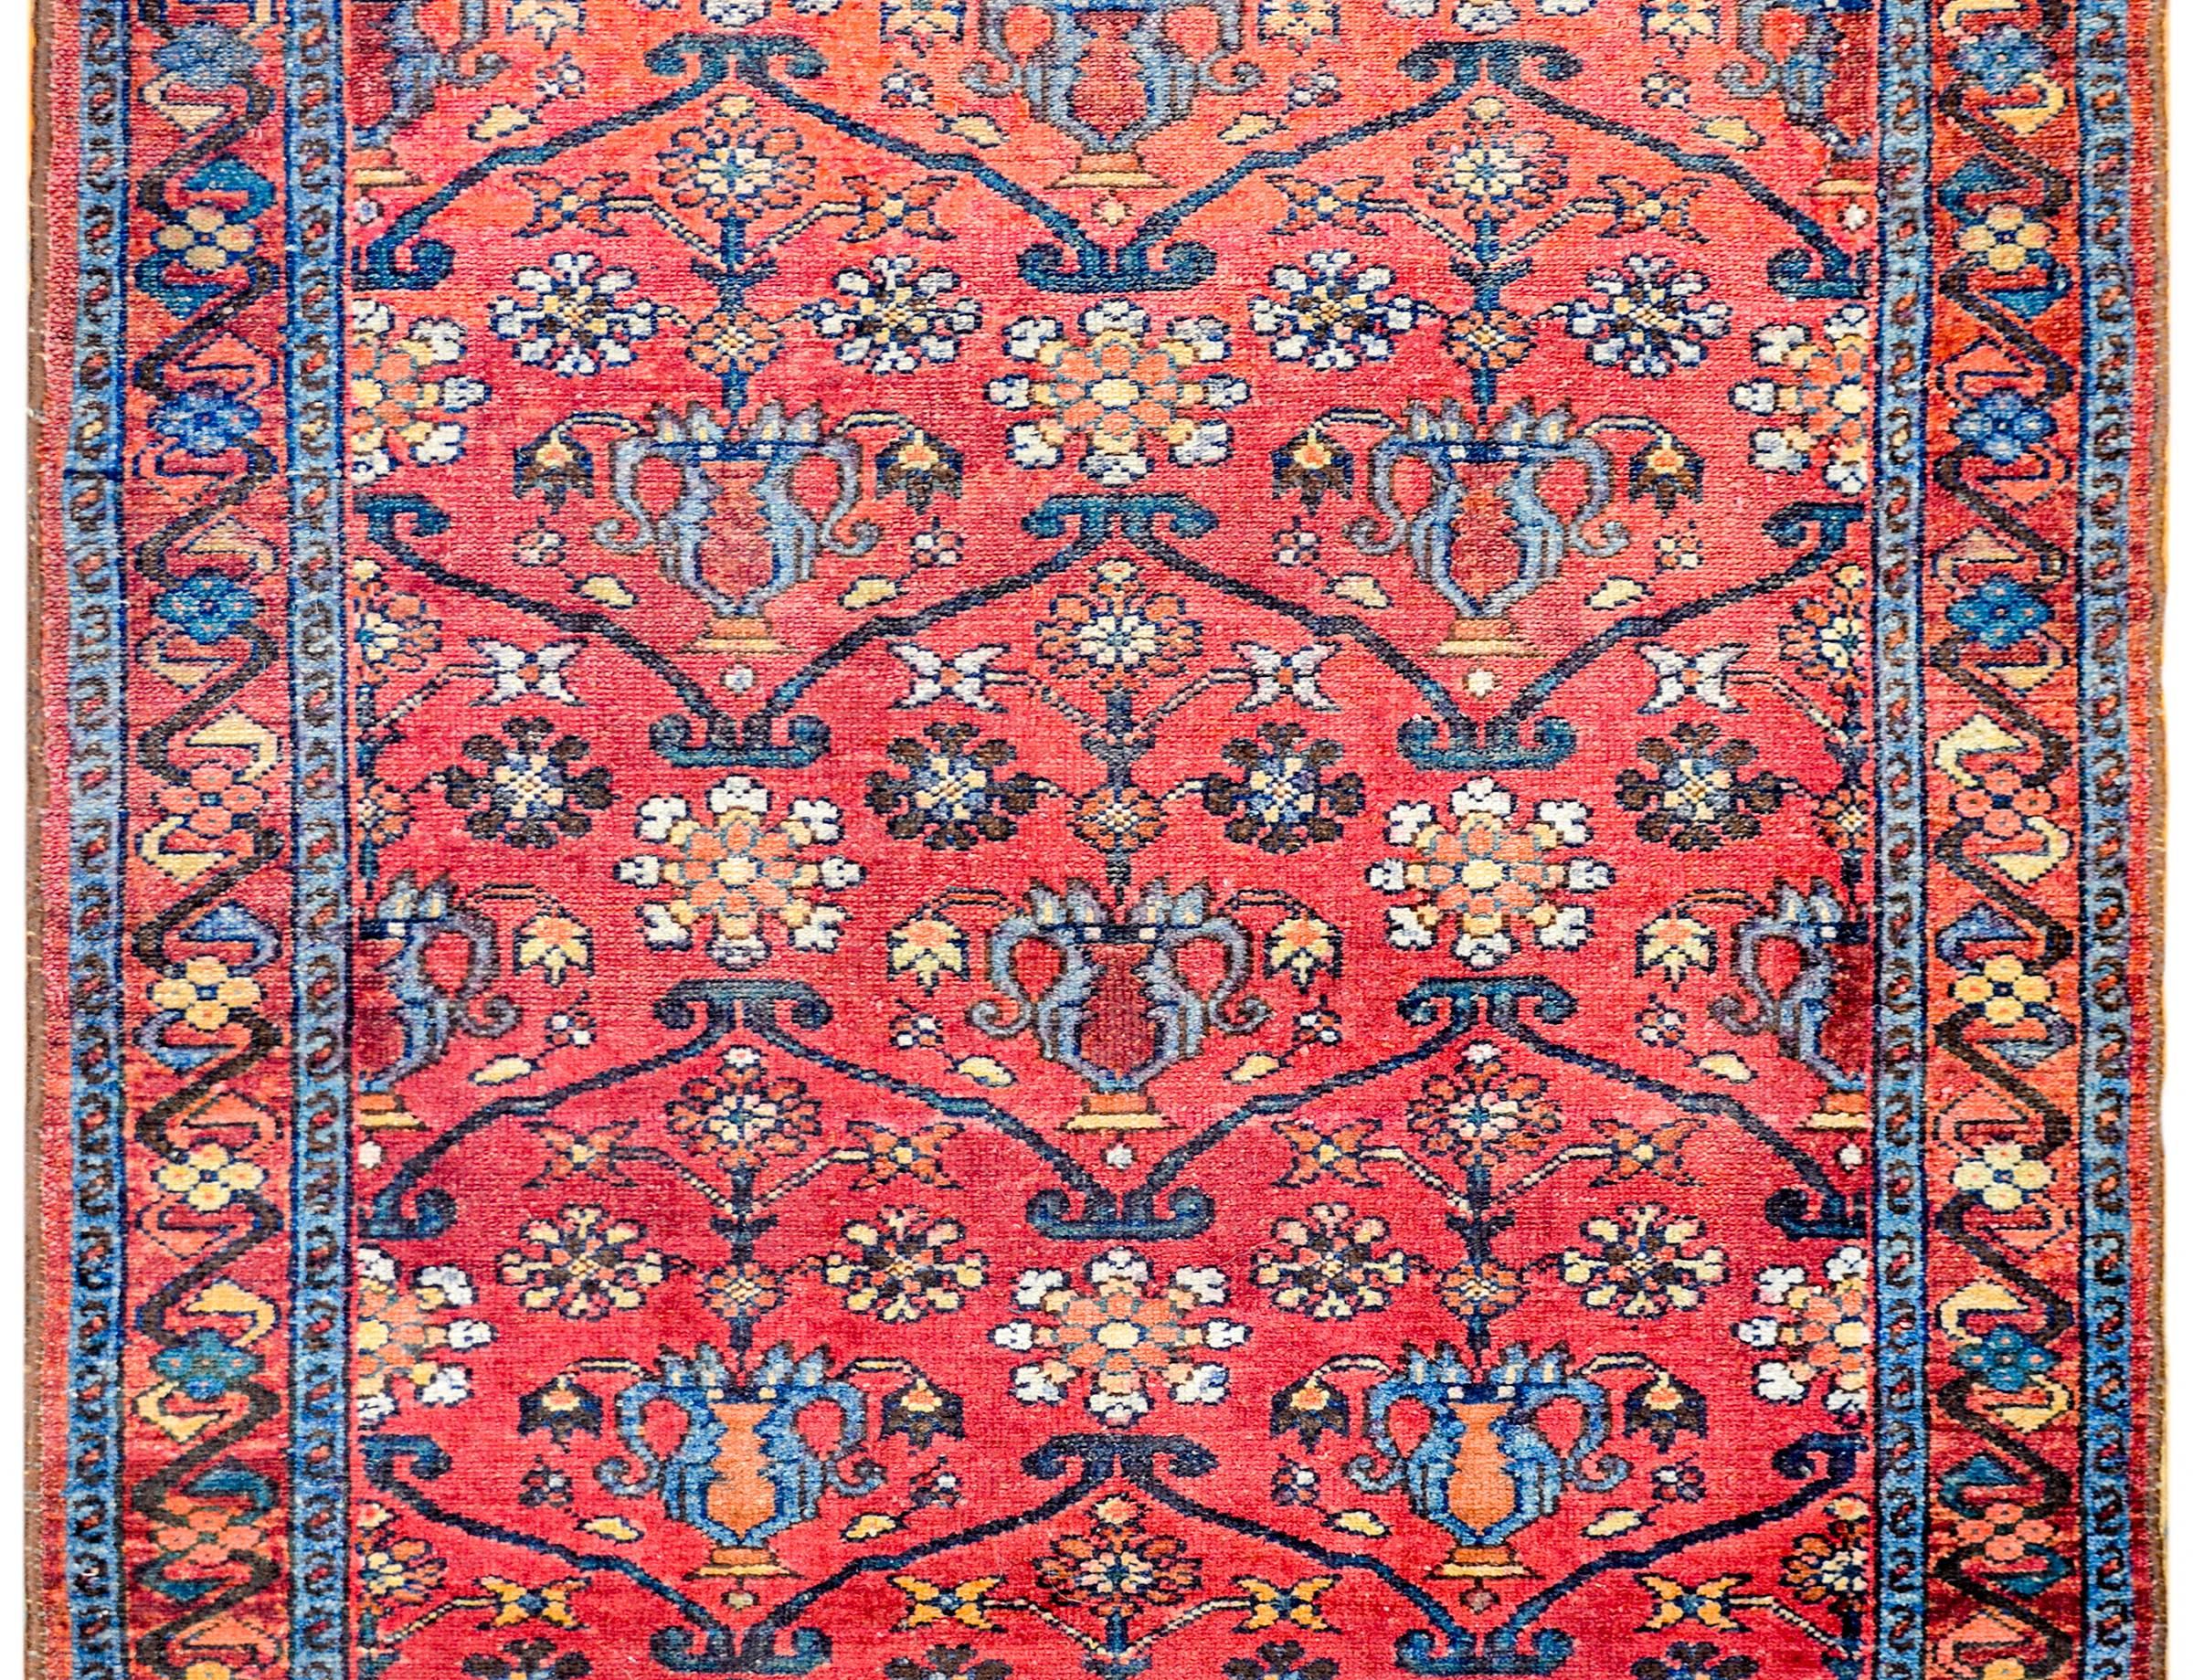 An amazing early 20th century Persian Lilihan rug with a bright crimson background, covered by a lacy, multicolored scrolling vine and floral pattern, surrounded by a wide complementary border with a large-scale floral pattern.